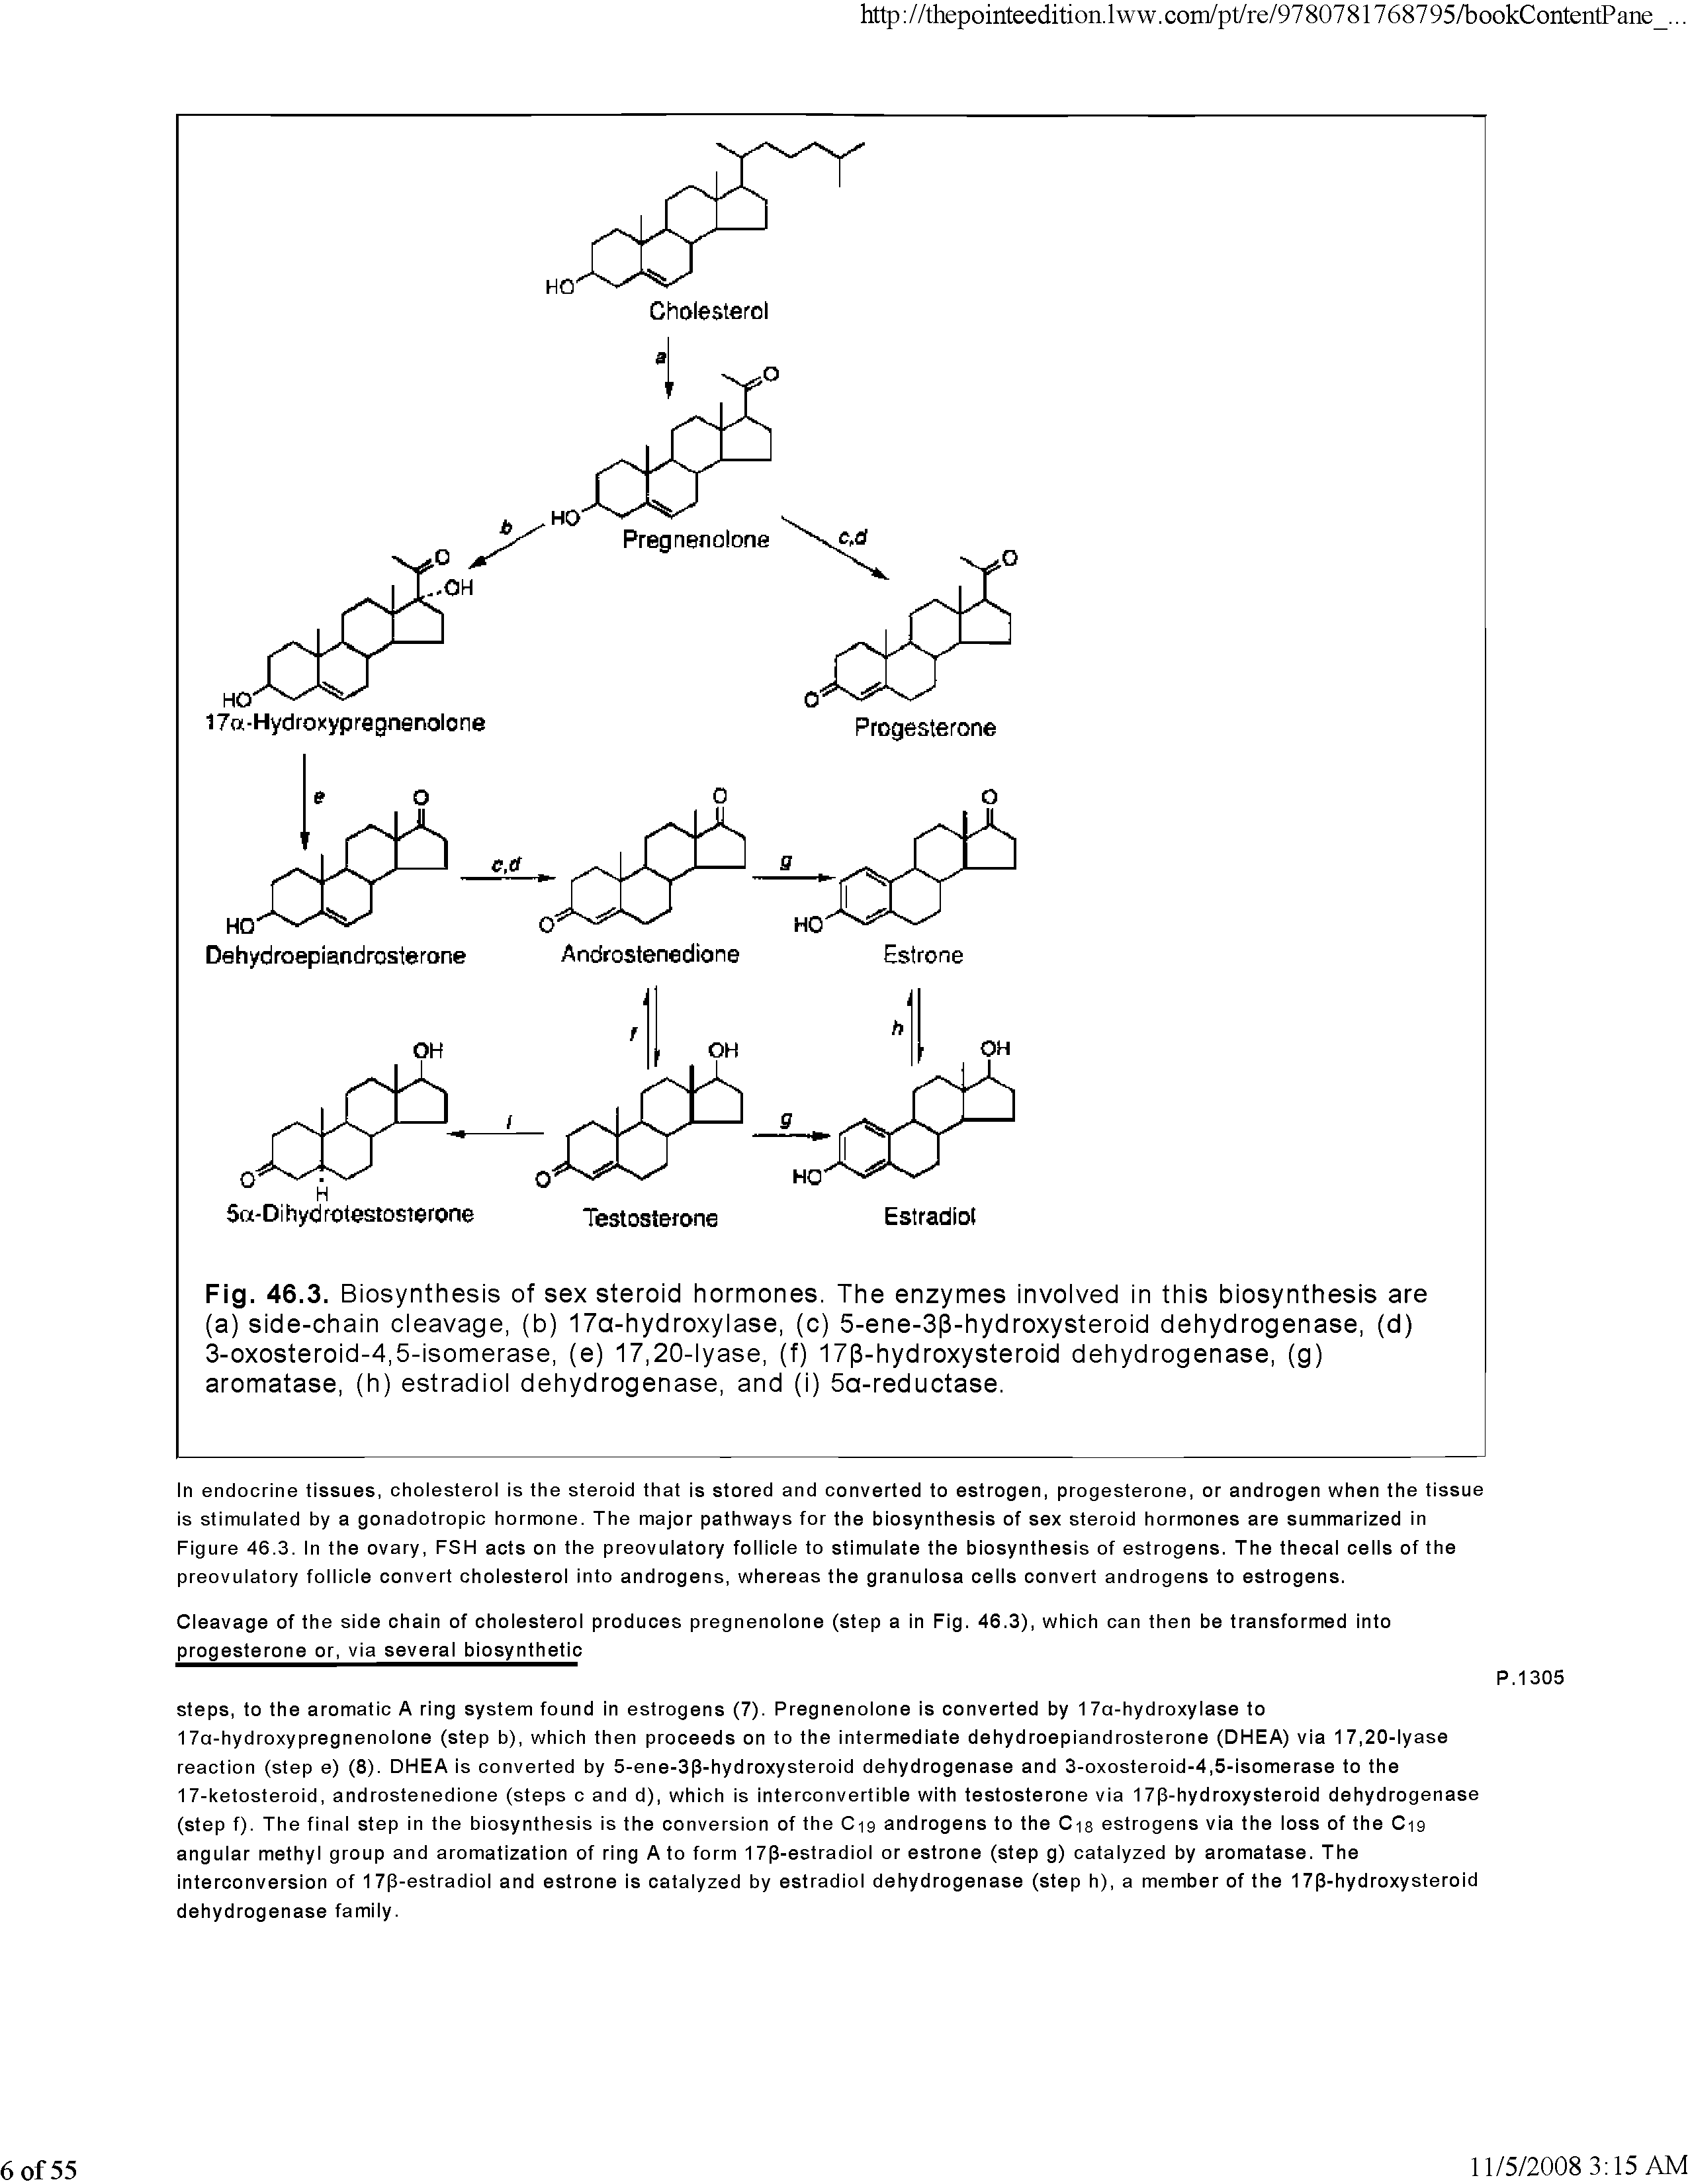 Fig. 46.3. Biosynthesis of sex steroid hormones. The enzymes involved in this biosynthesis are (a) side-ohain cleavage, (b) 17a-hydroxylase, (o) 5-ene-3p-hydroxysteroid dehydrogenase, (d) 3-oxosteroid-4,5-isomerase, (e) 17,20-lyase, (f) 17(3-hydroxysteroid dehydrogenase, (g) aromatase, (h) estradiol dehydrogenase, and (i) 5a-reduotase.